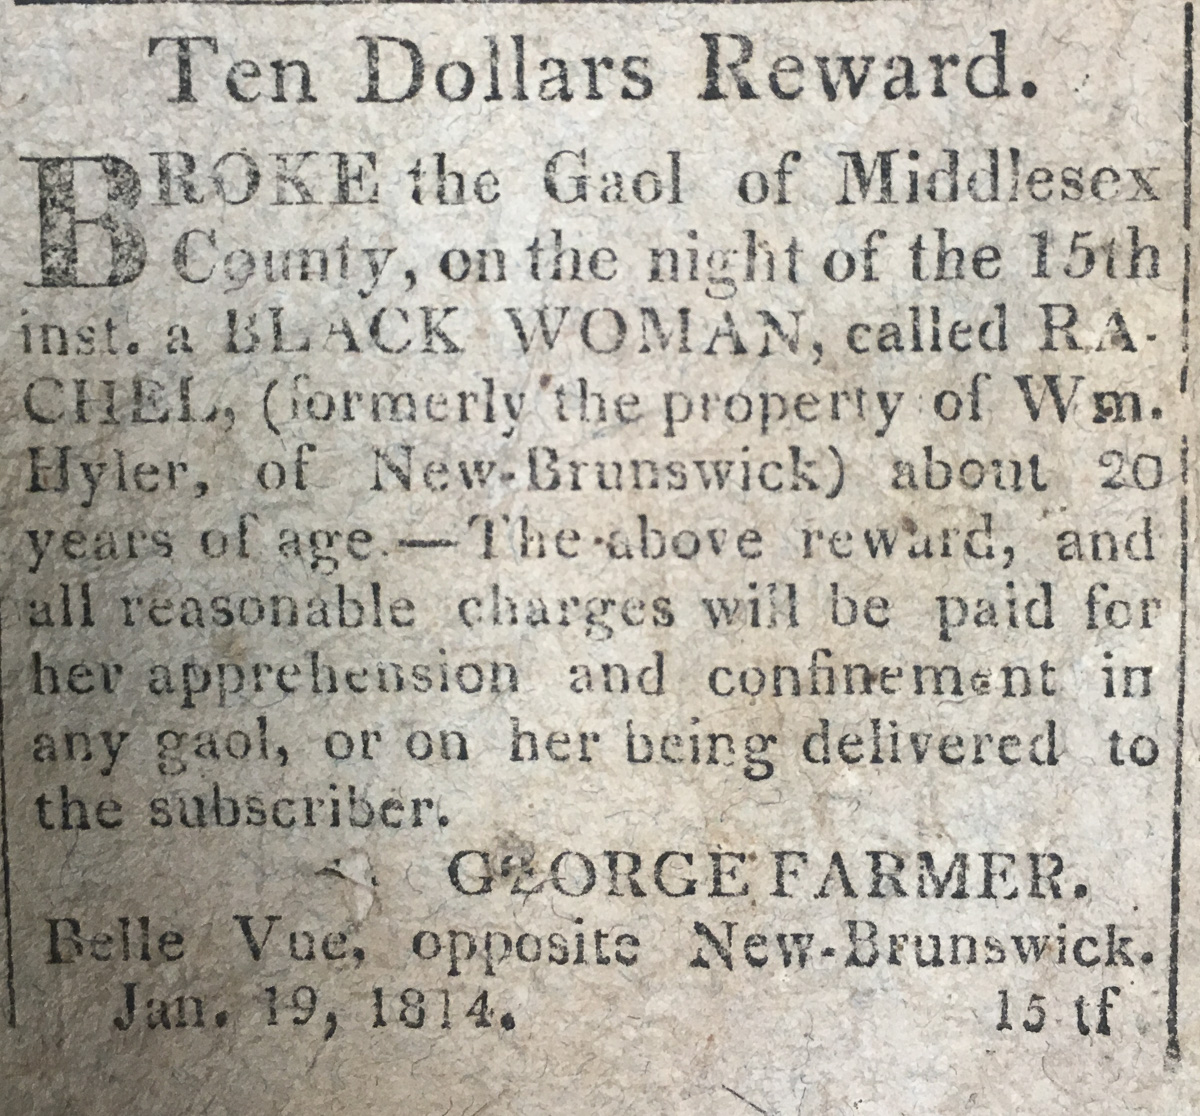 Collection: Slavery Era Newspaper Clippings